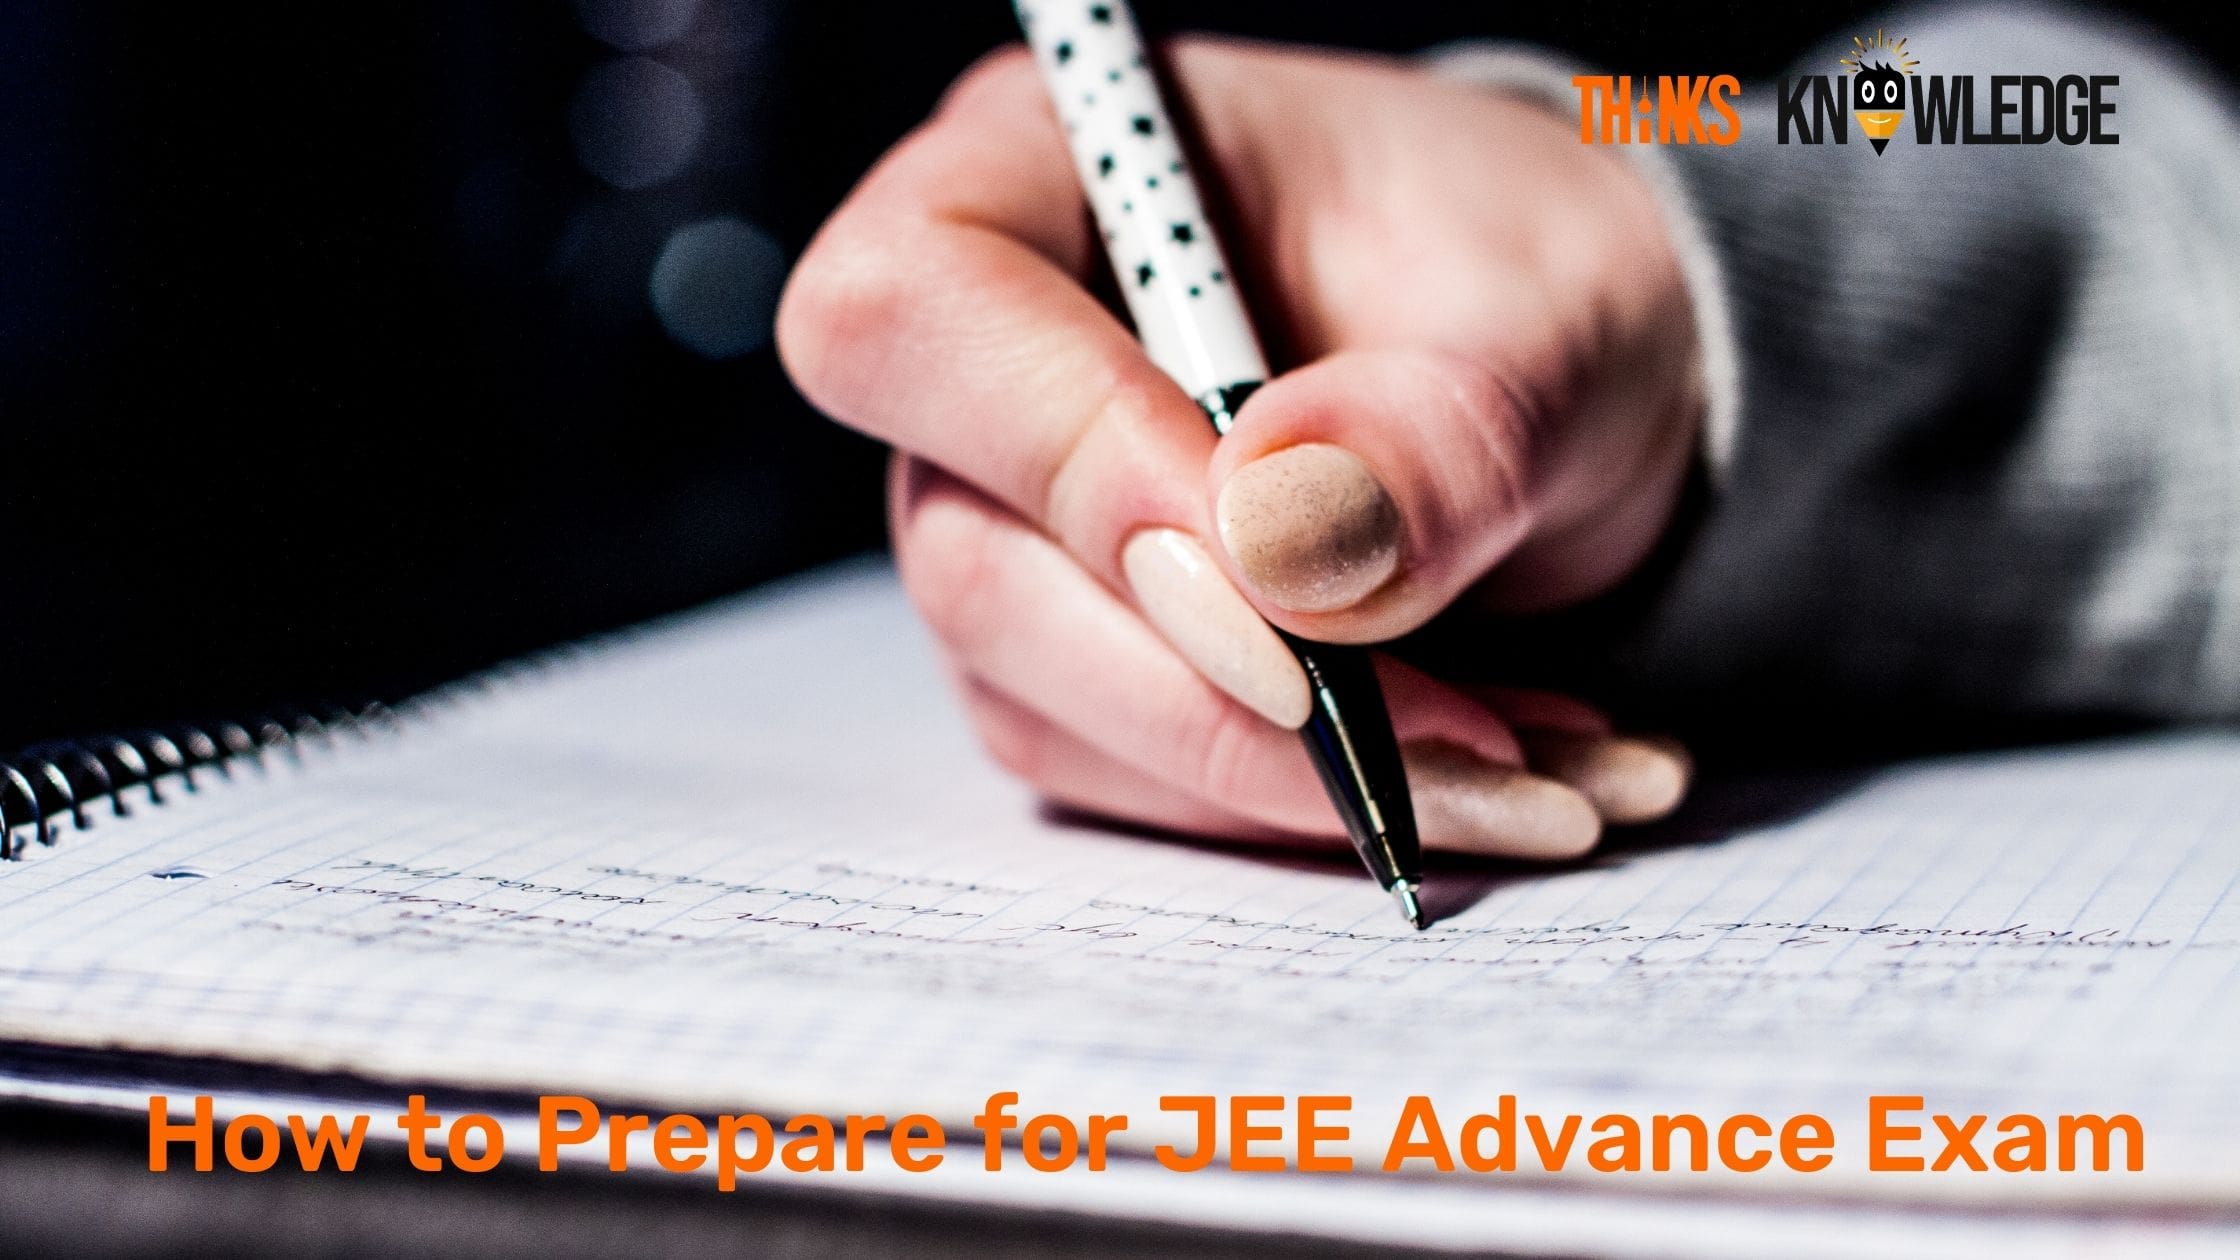 How to Prepare for JEE Advance Exam